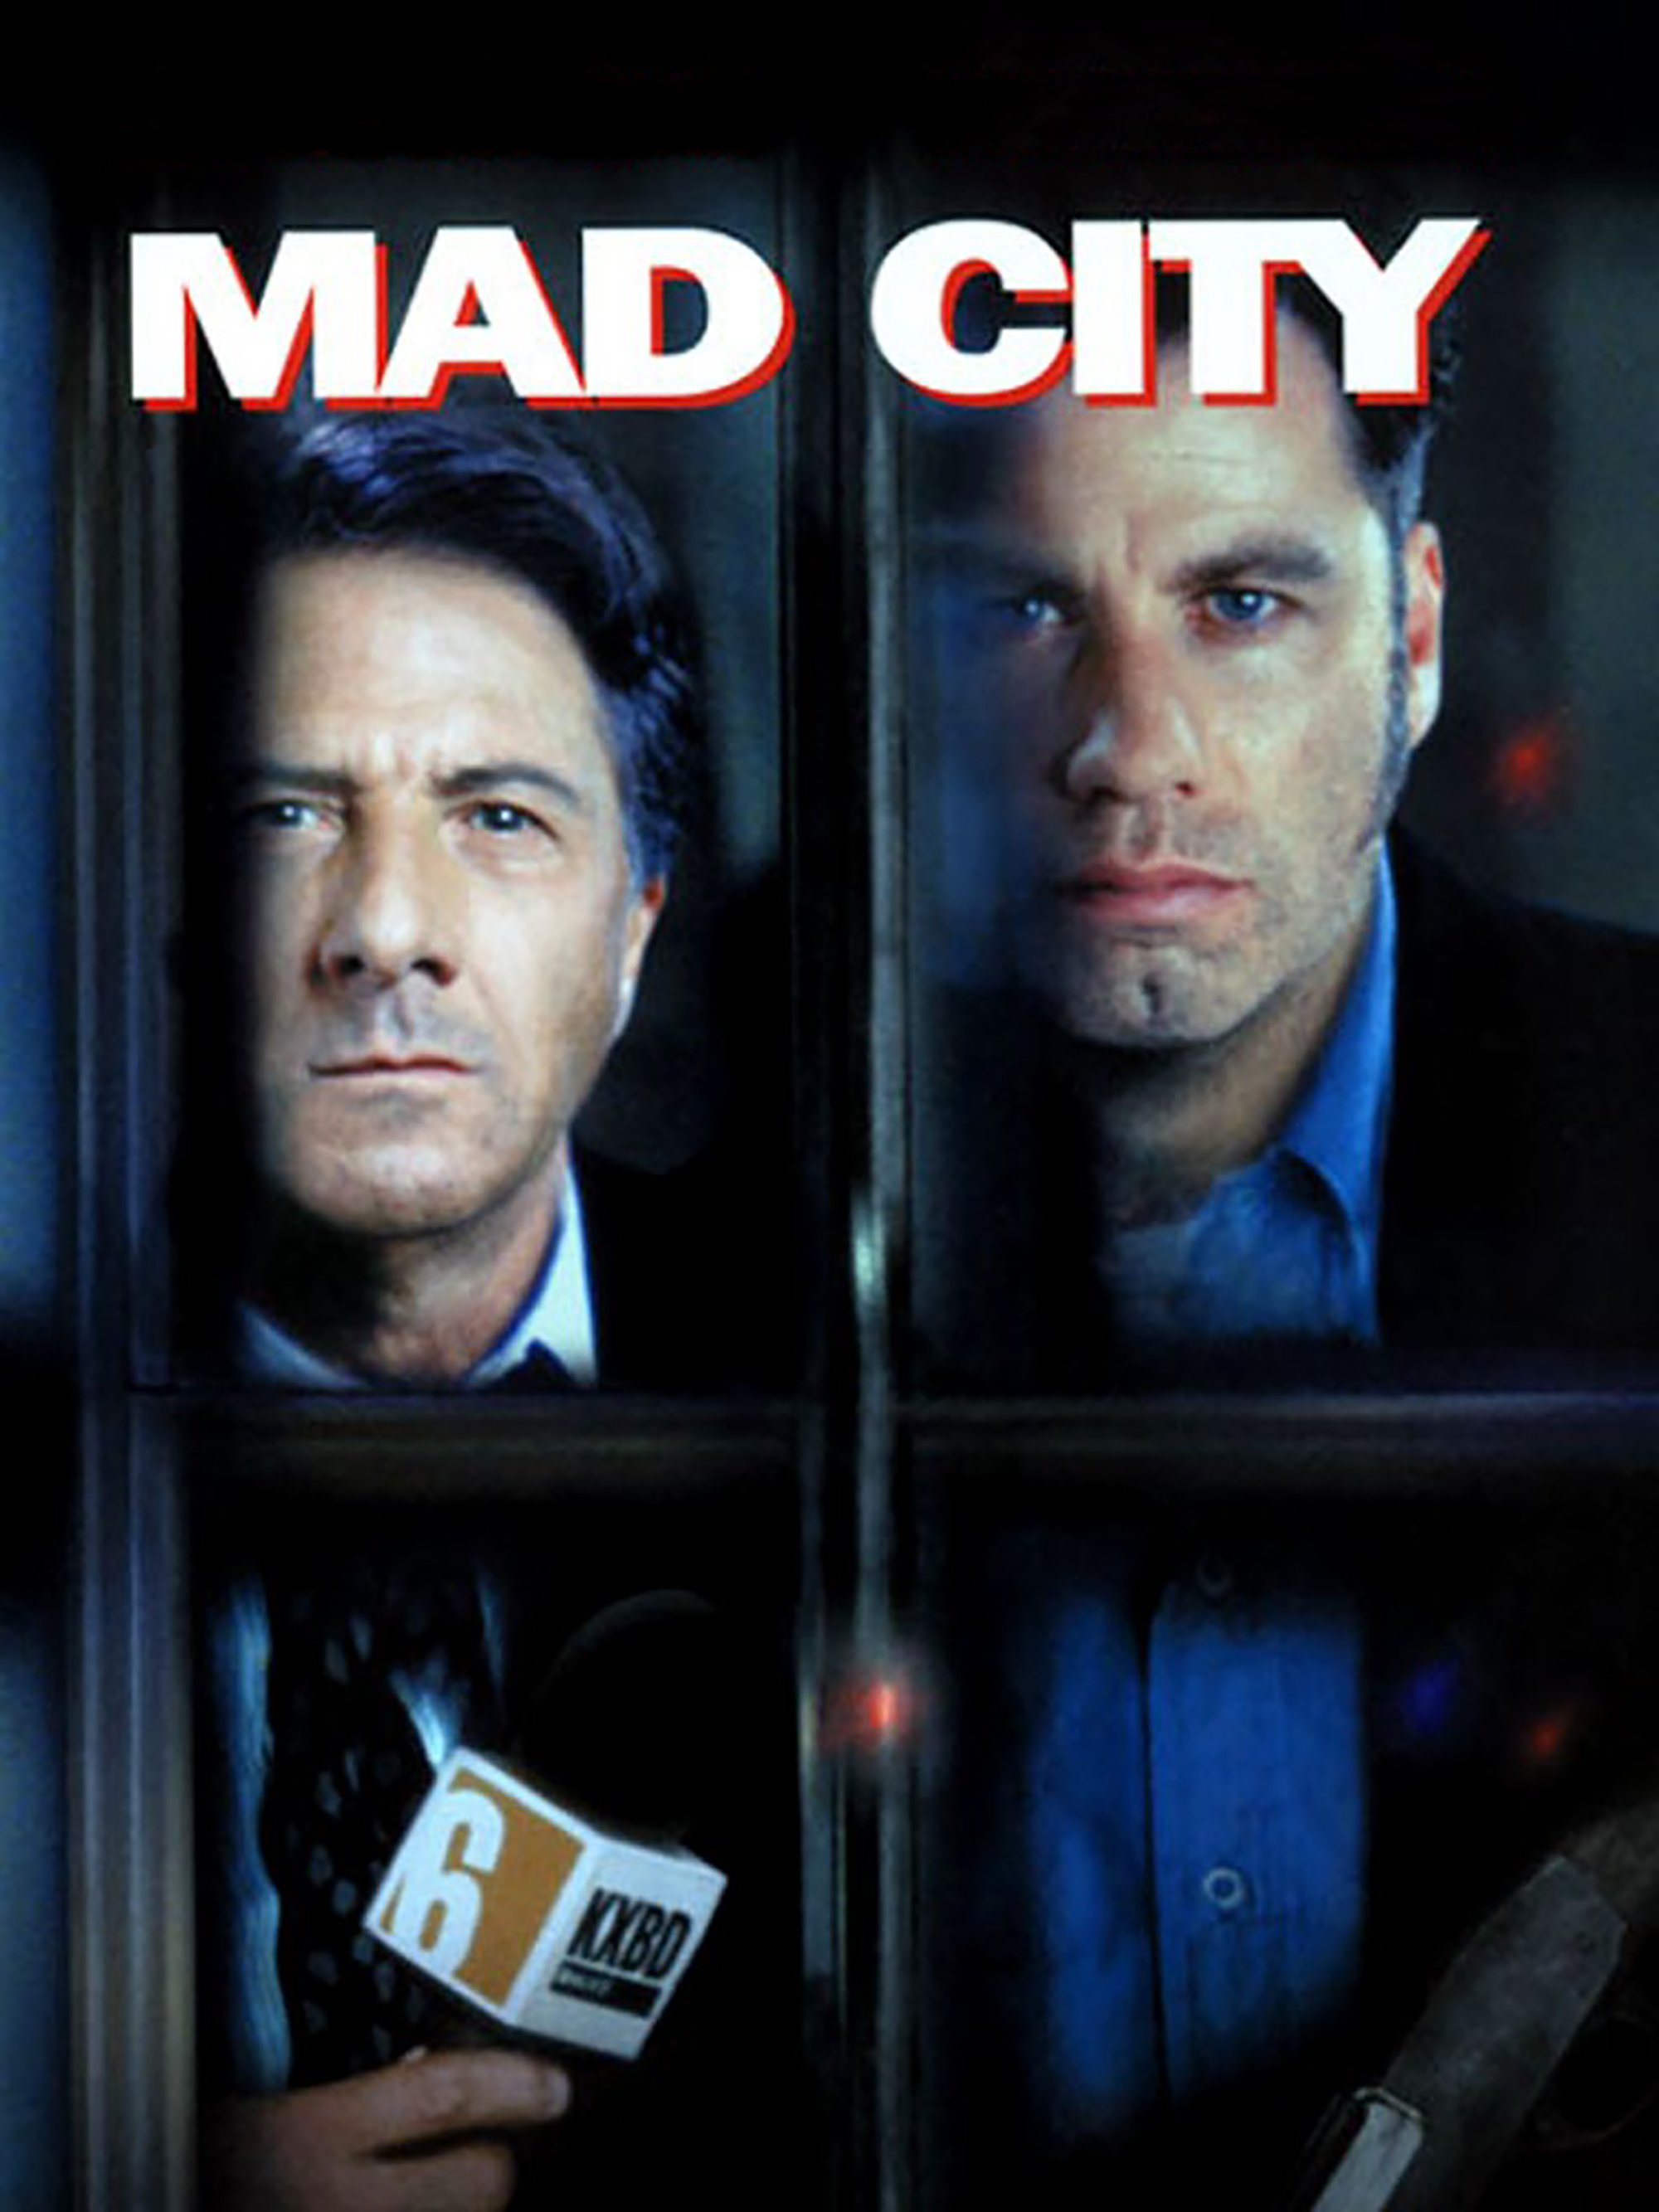 Poster for the movie "Mad City"